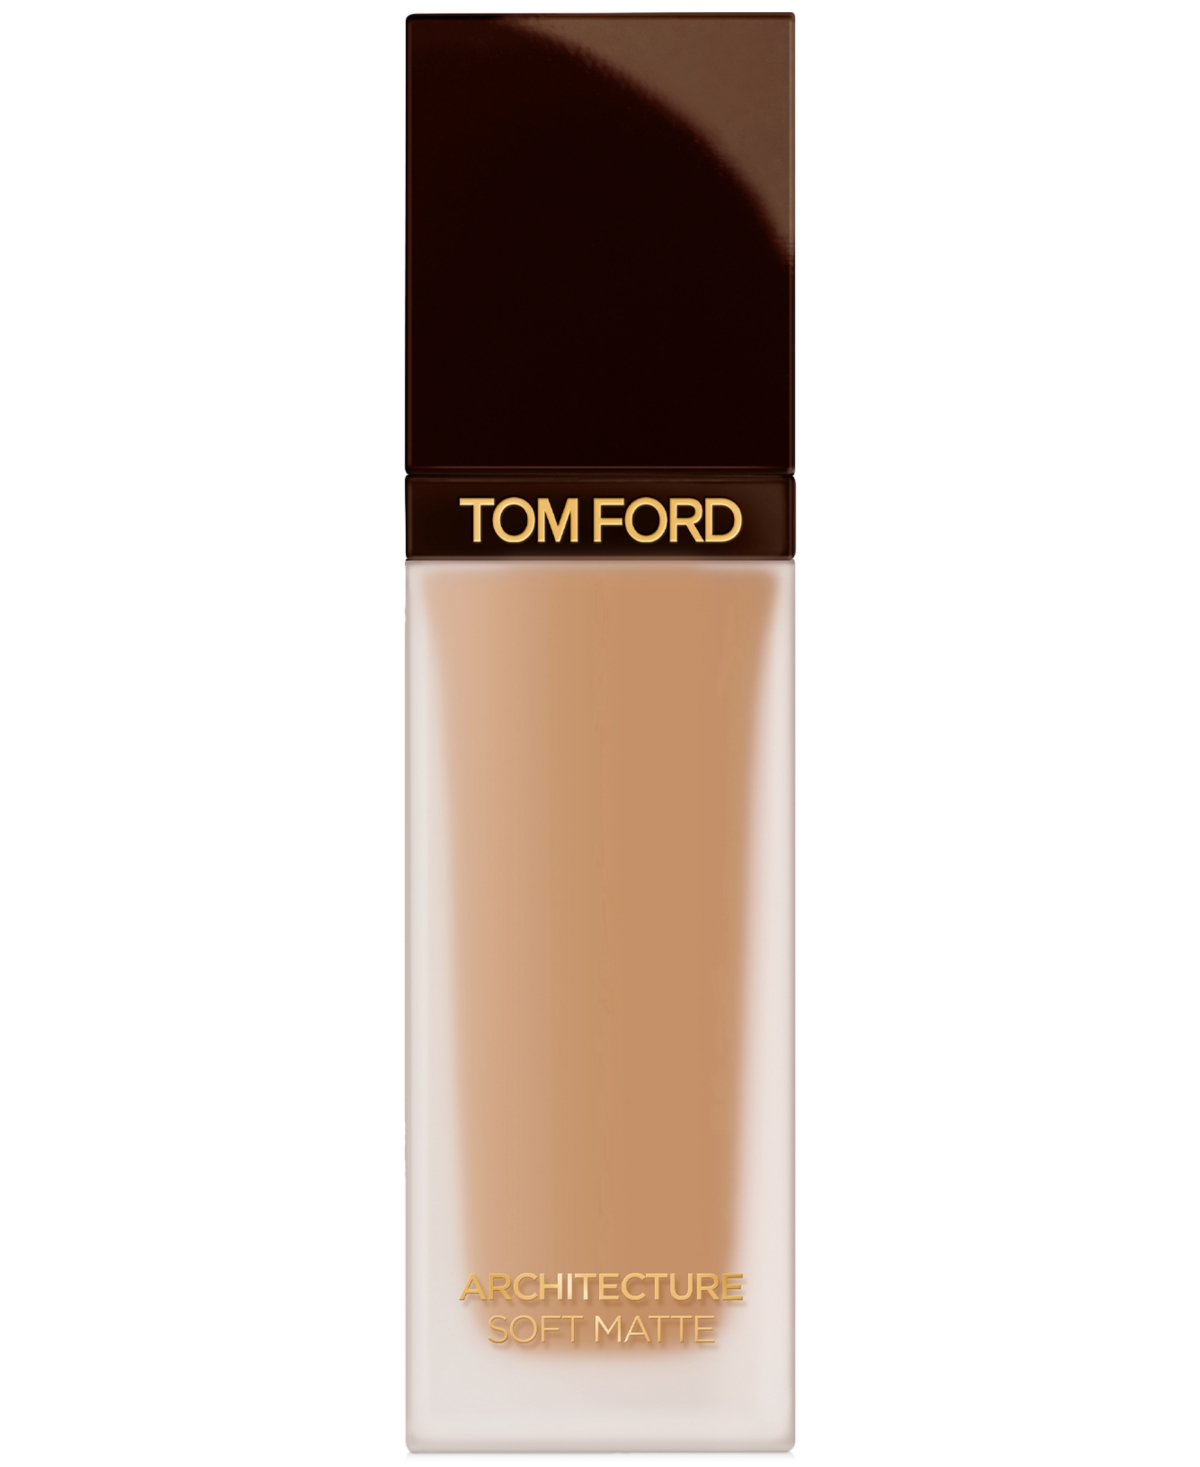 Shop Tom Ford Architecture Soft Matte Blurring Foundation In . Sable - Medium Deep